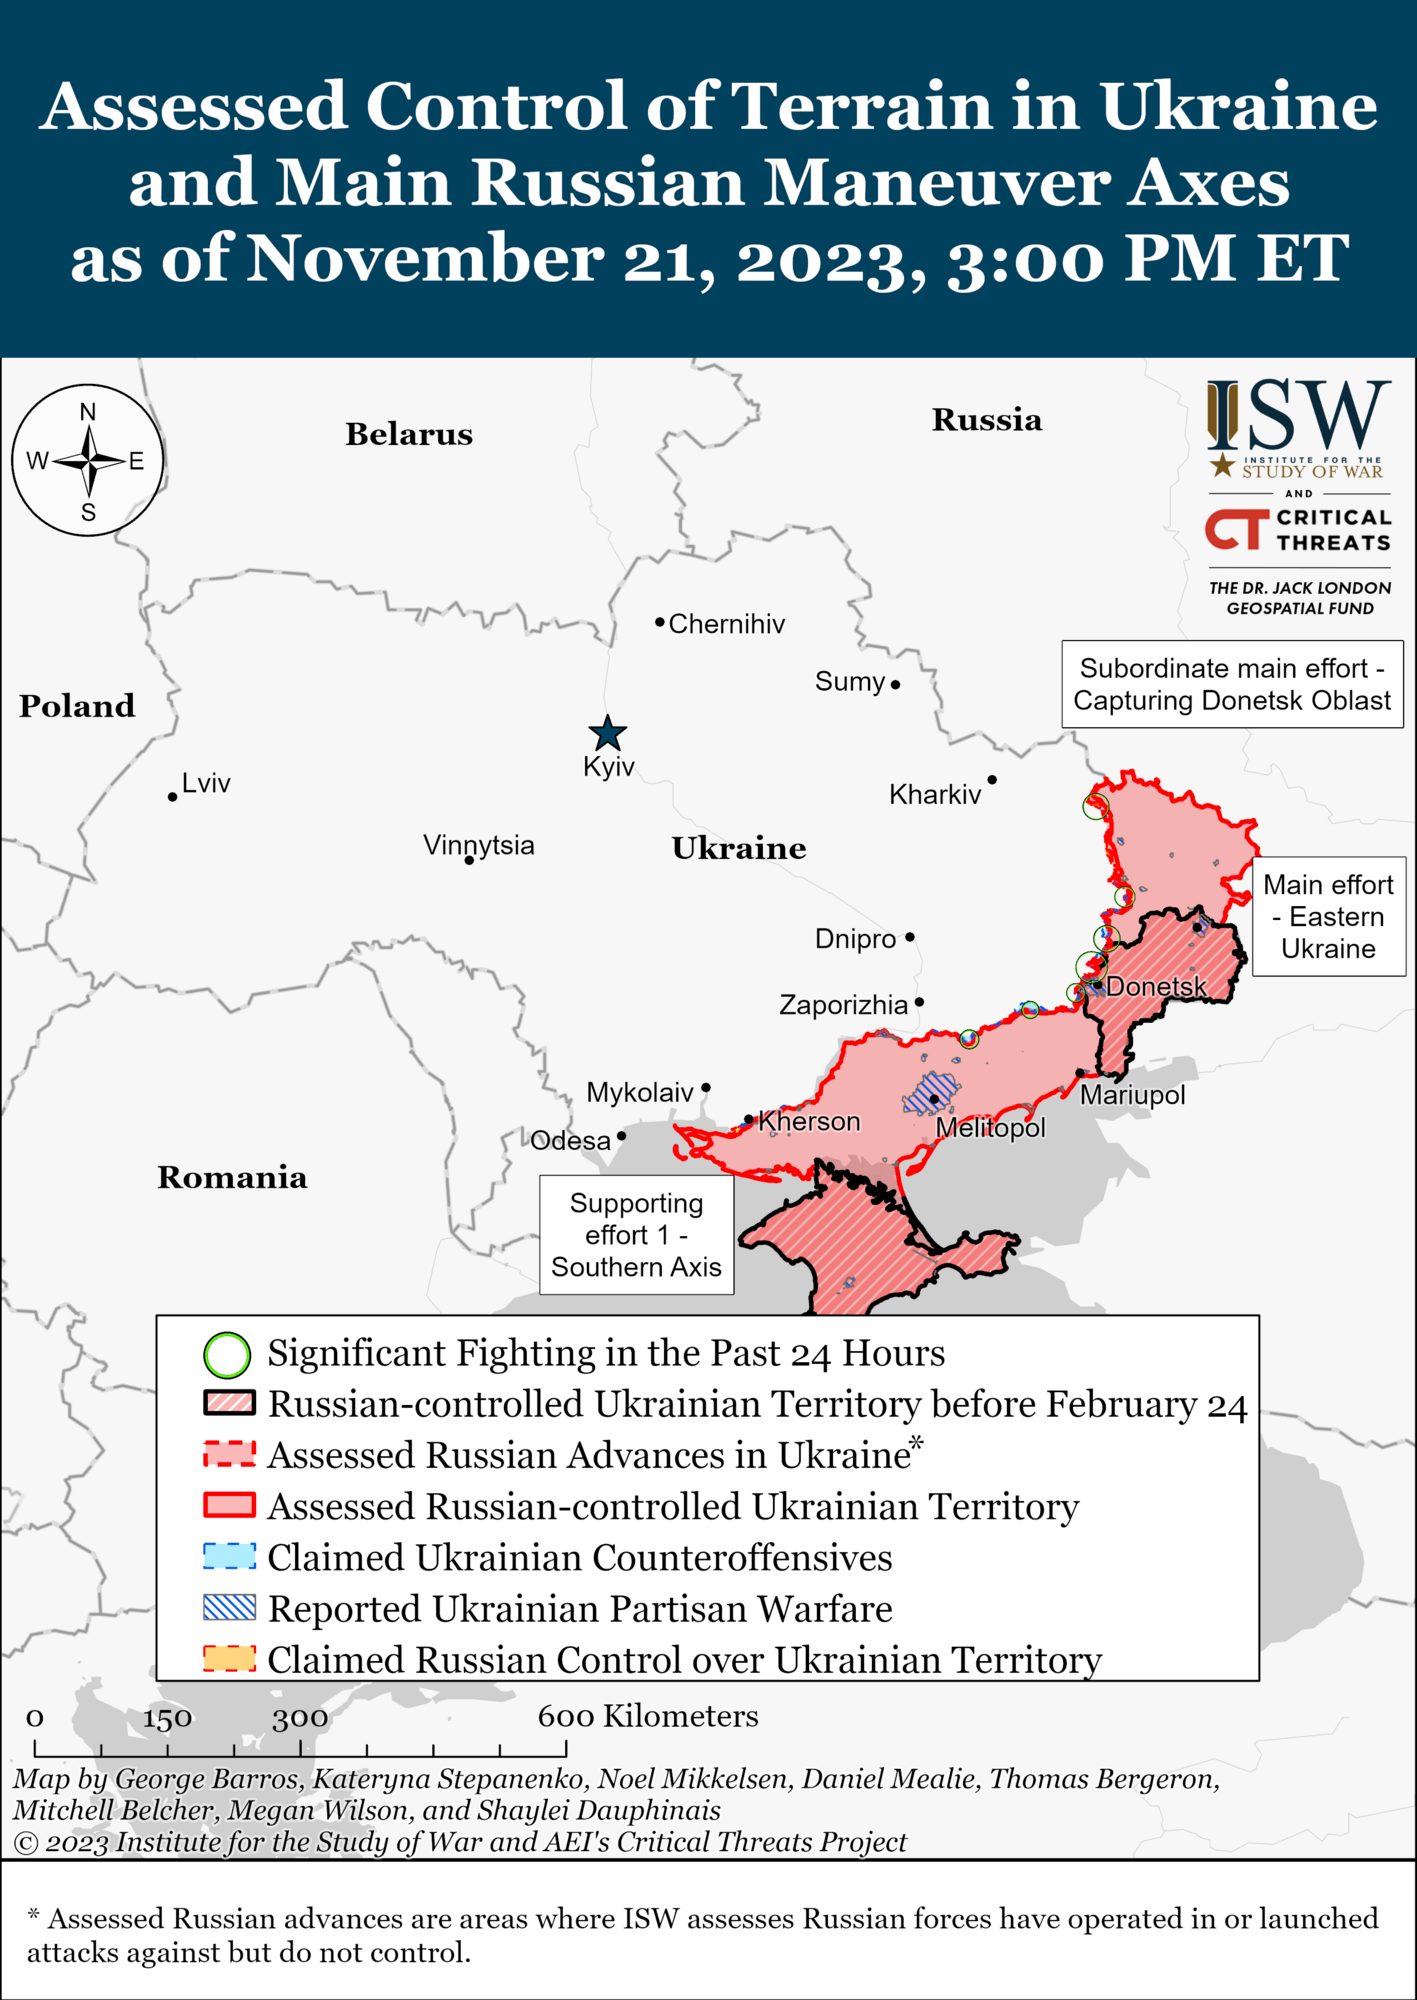 Both Ukraine and Russia perform operations despite worsening weather: ISW names key areas. Map